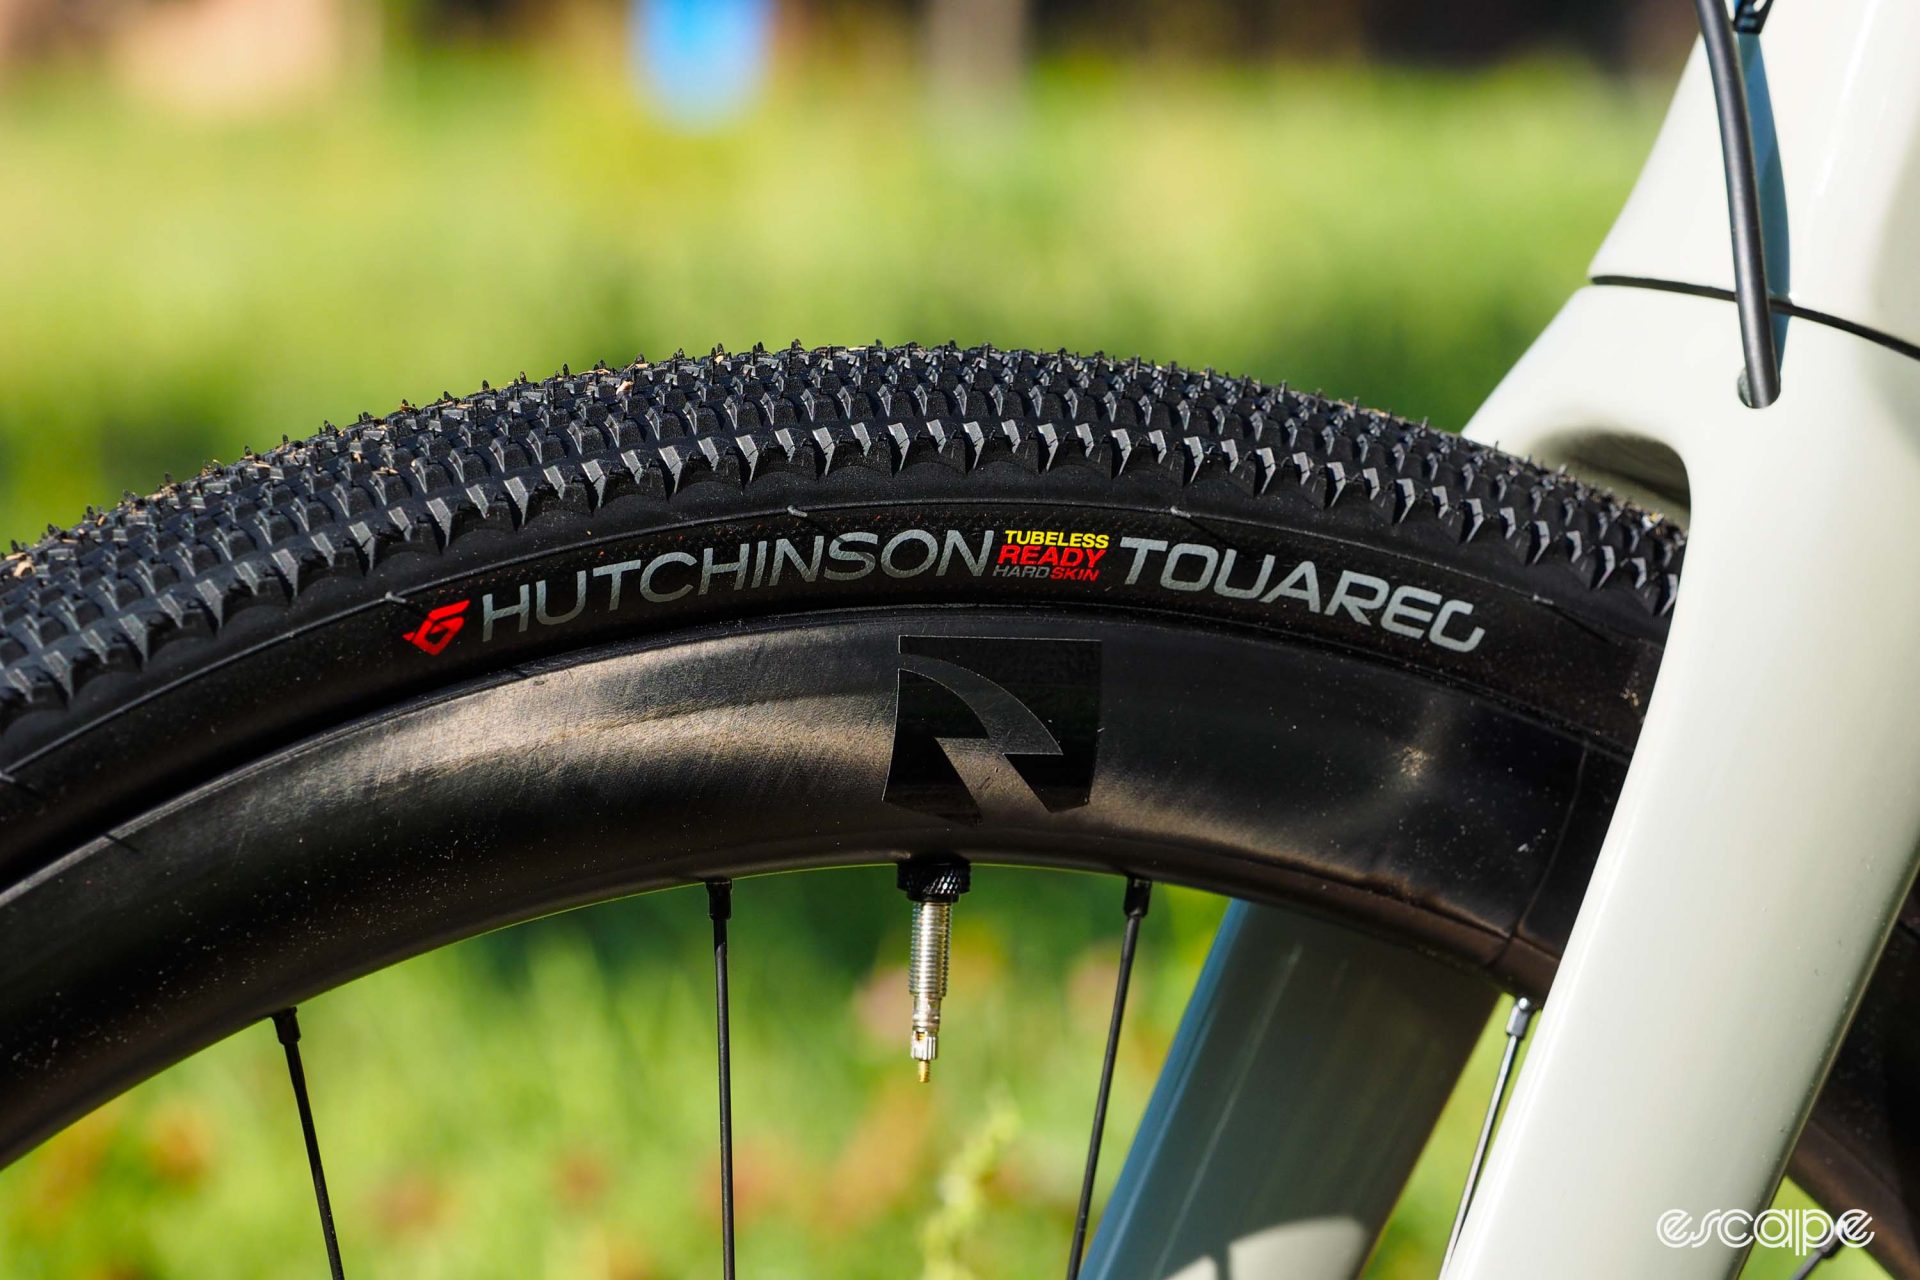 Hutchinson's Touareg tires feature a most-conditions tread with tightly spaced knobs poking up from the casing.